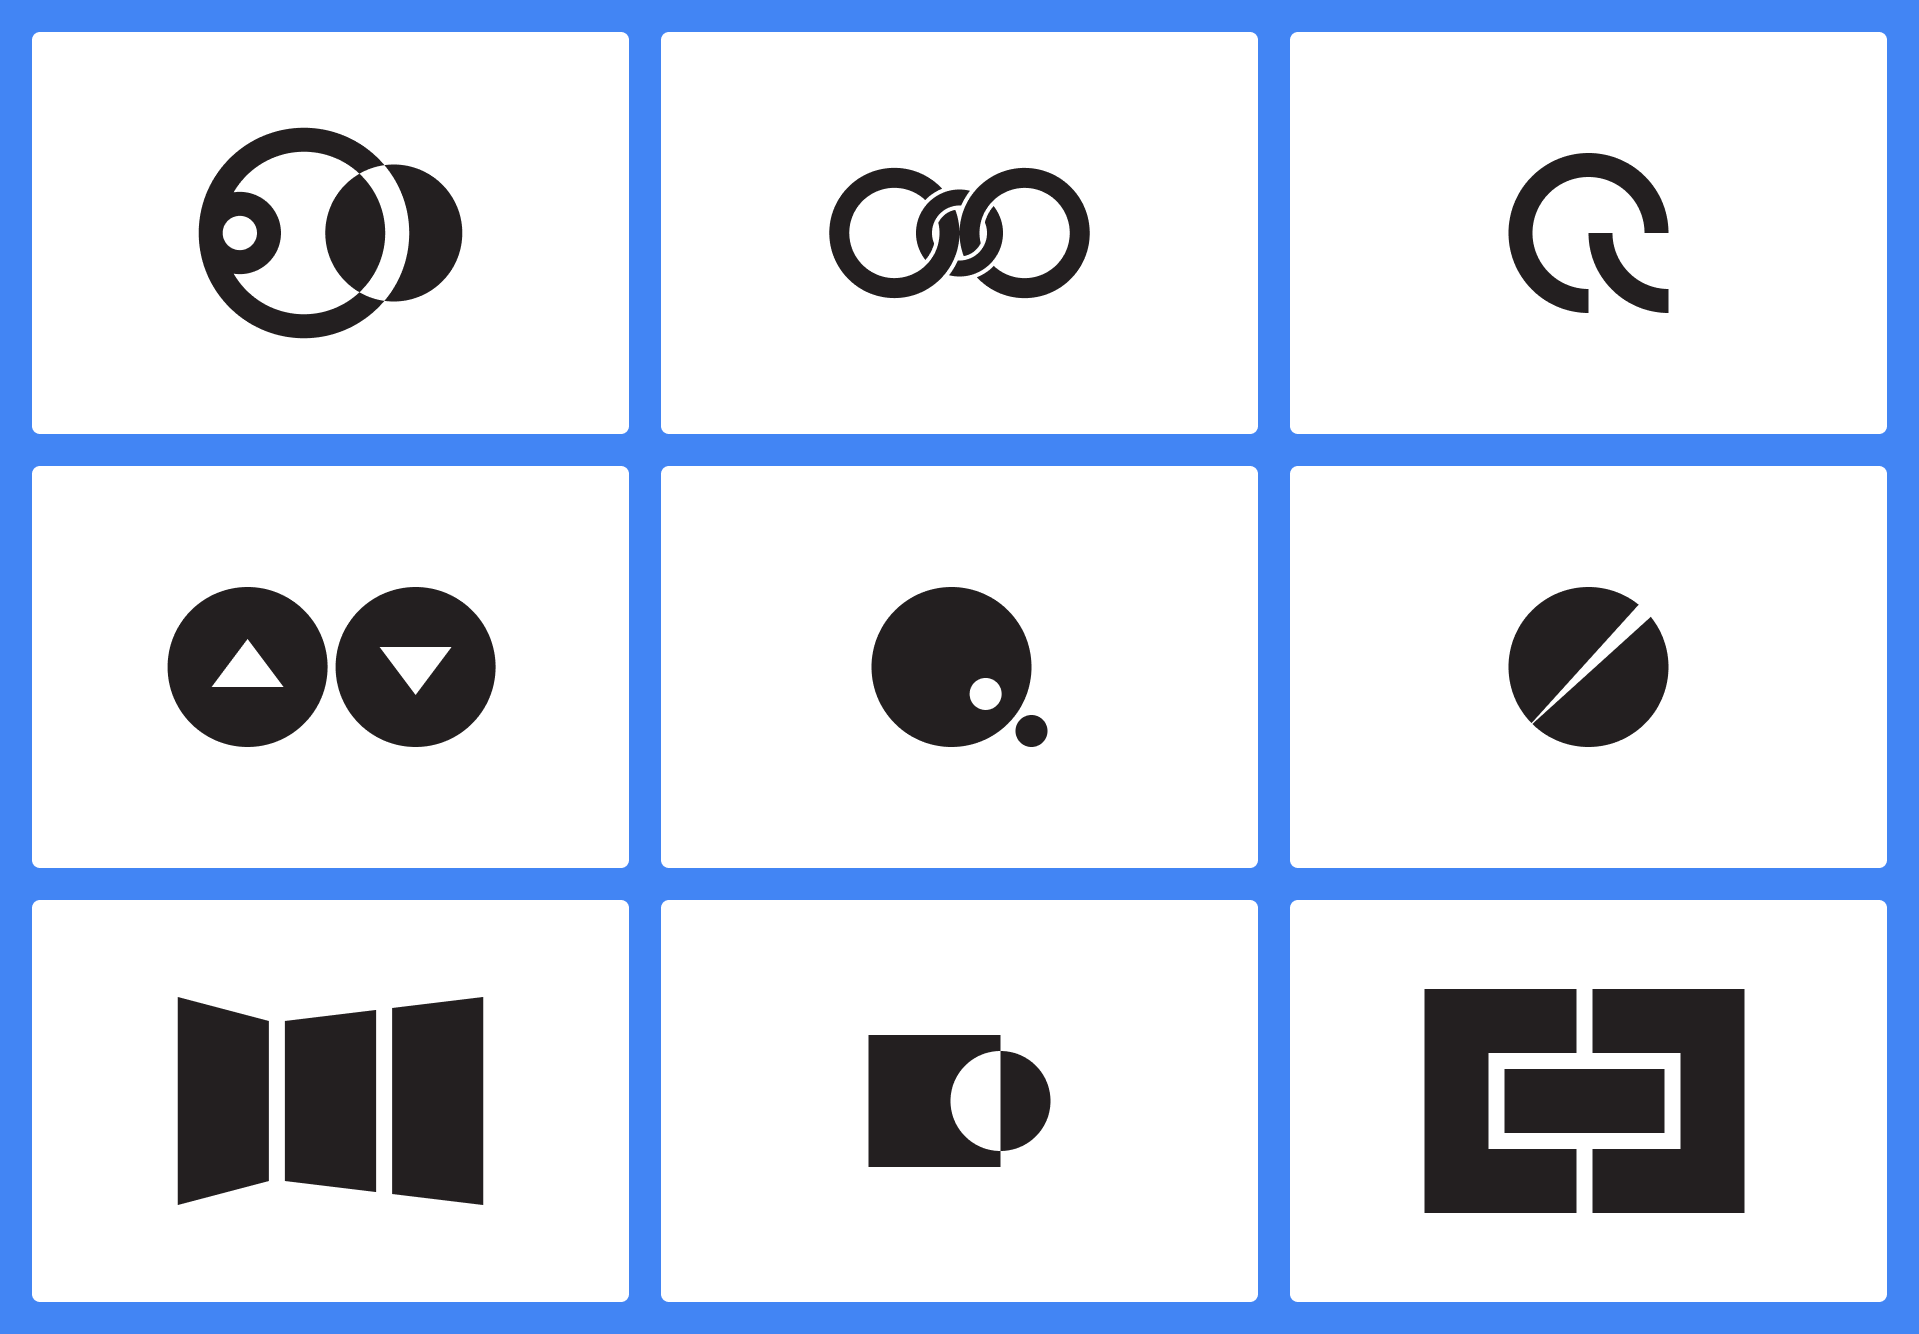 A set of experimental icons I was using to explore different logo options.